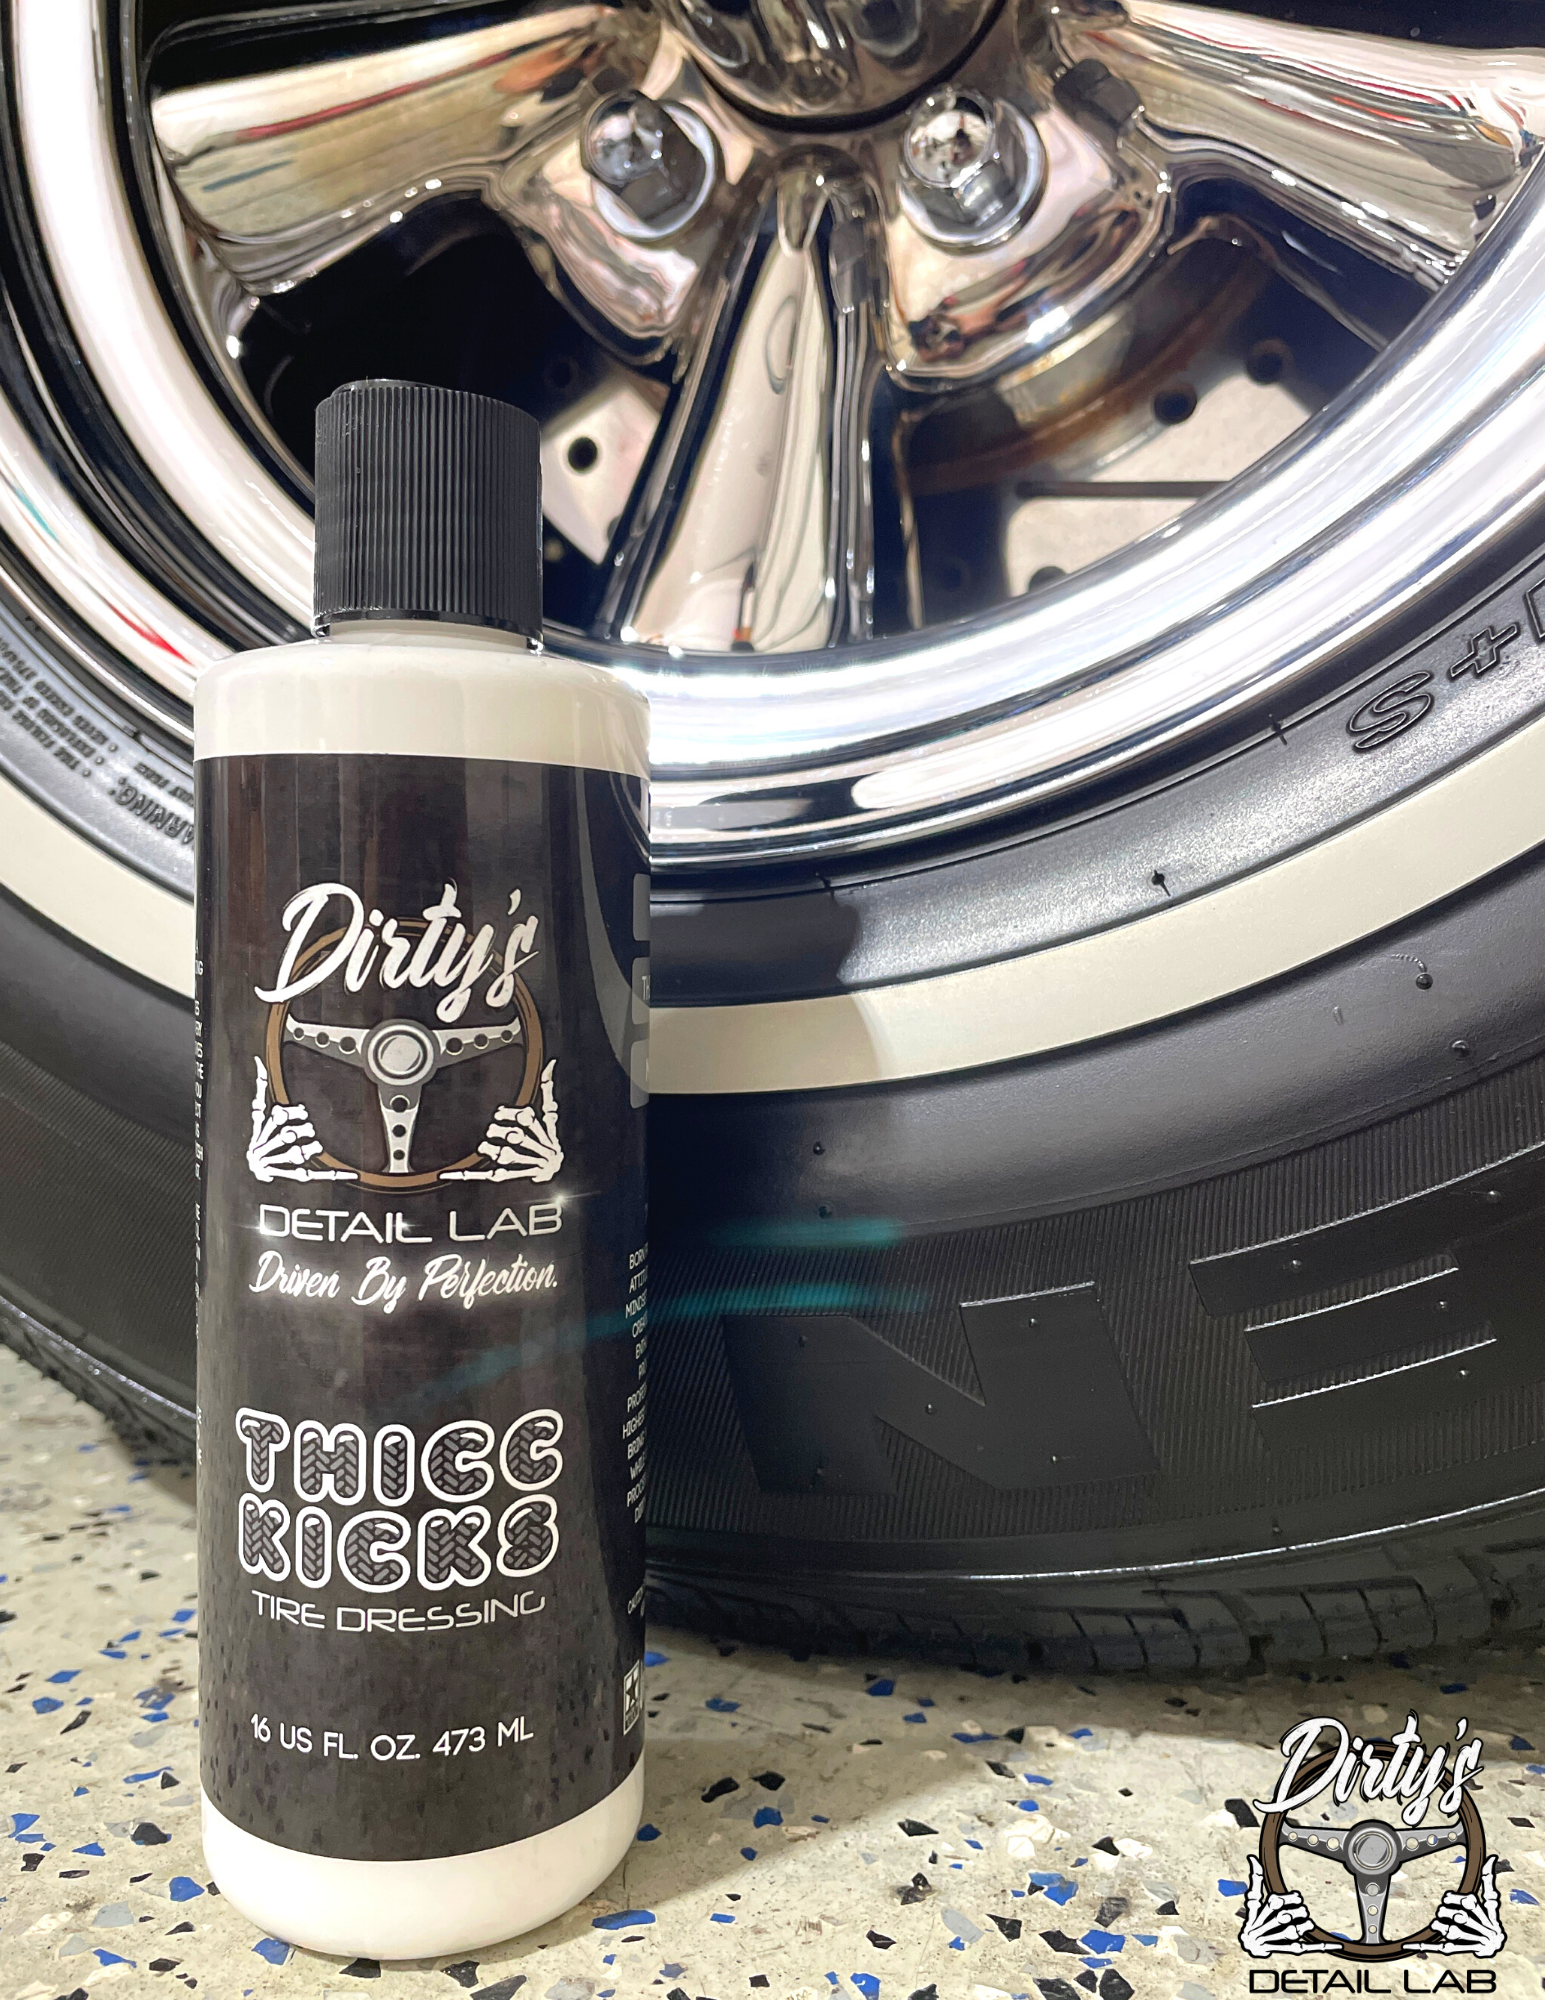 Thicc Kicks Tire Dressing  Vinyl Rubber And Plastic Dressing – Dirty's  Detail Lab